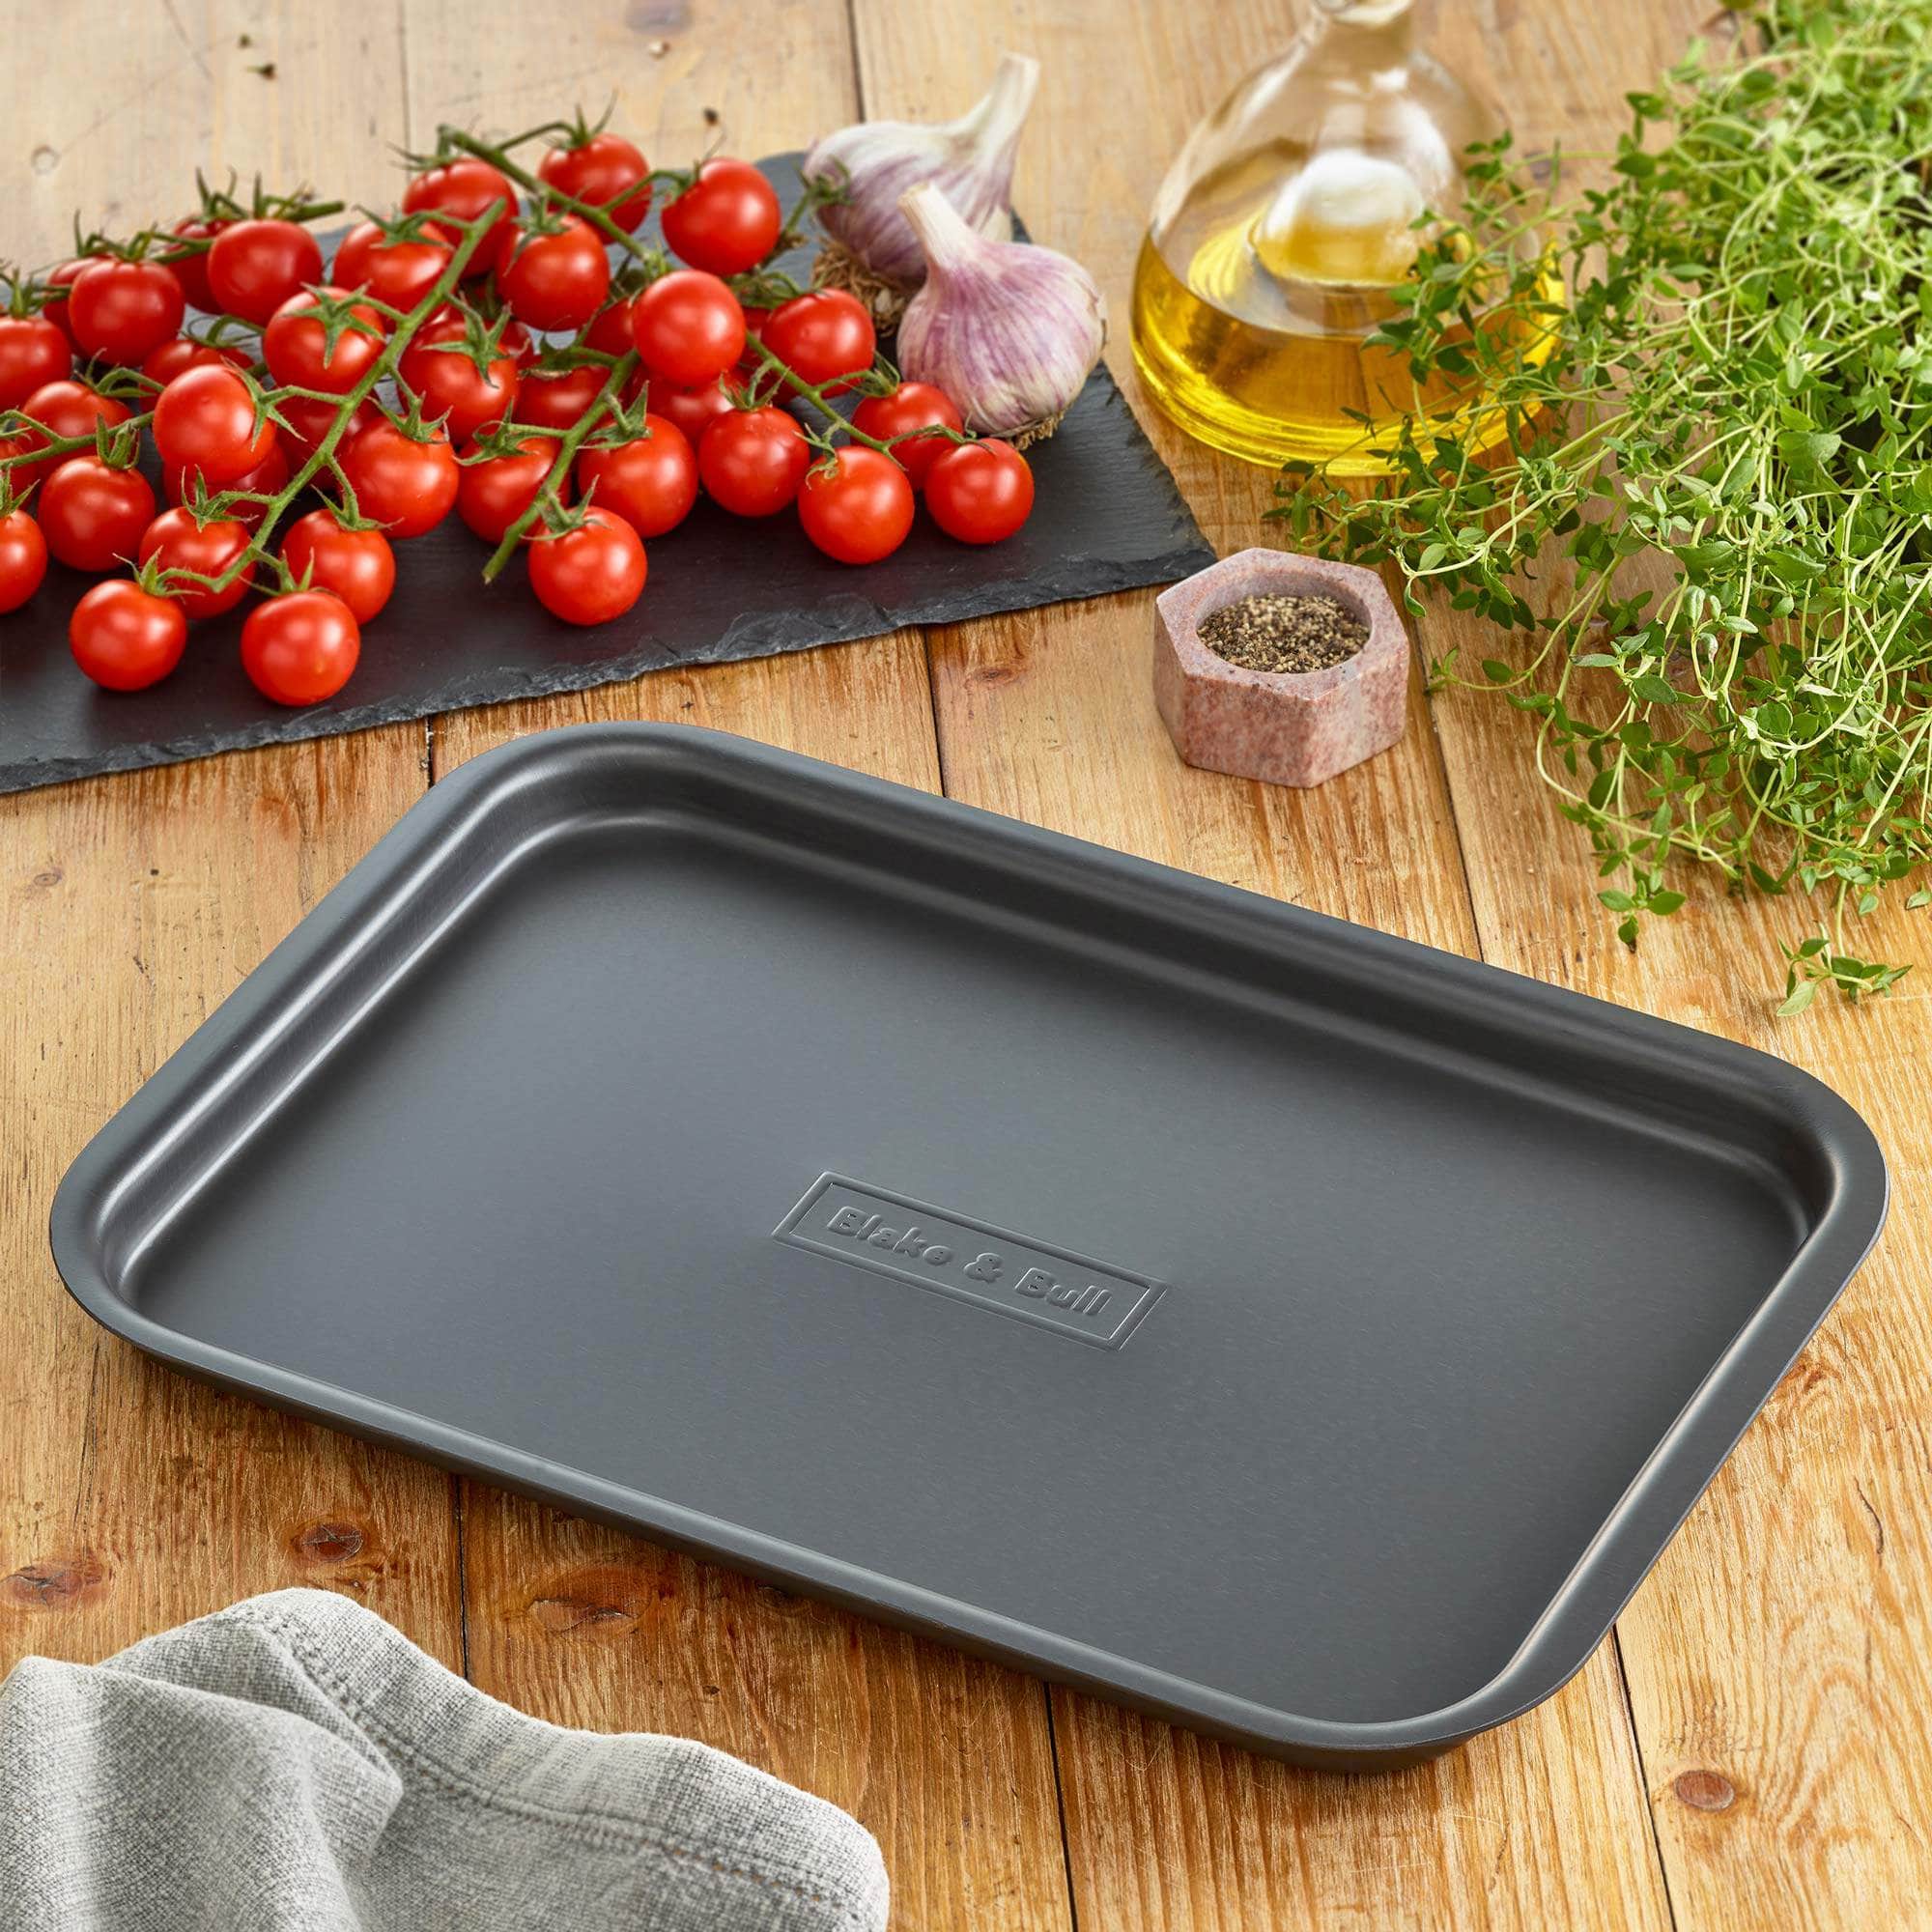 Half Oven' Baking Tray for use with Aga Range Cookers